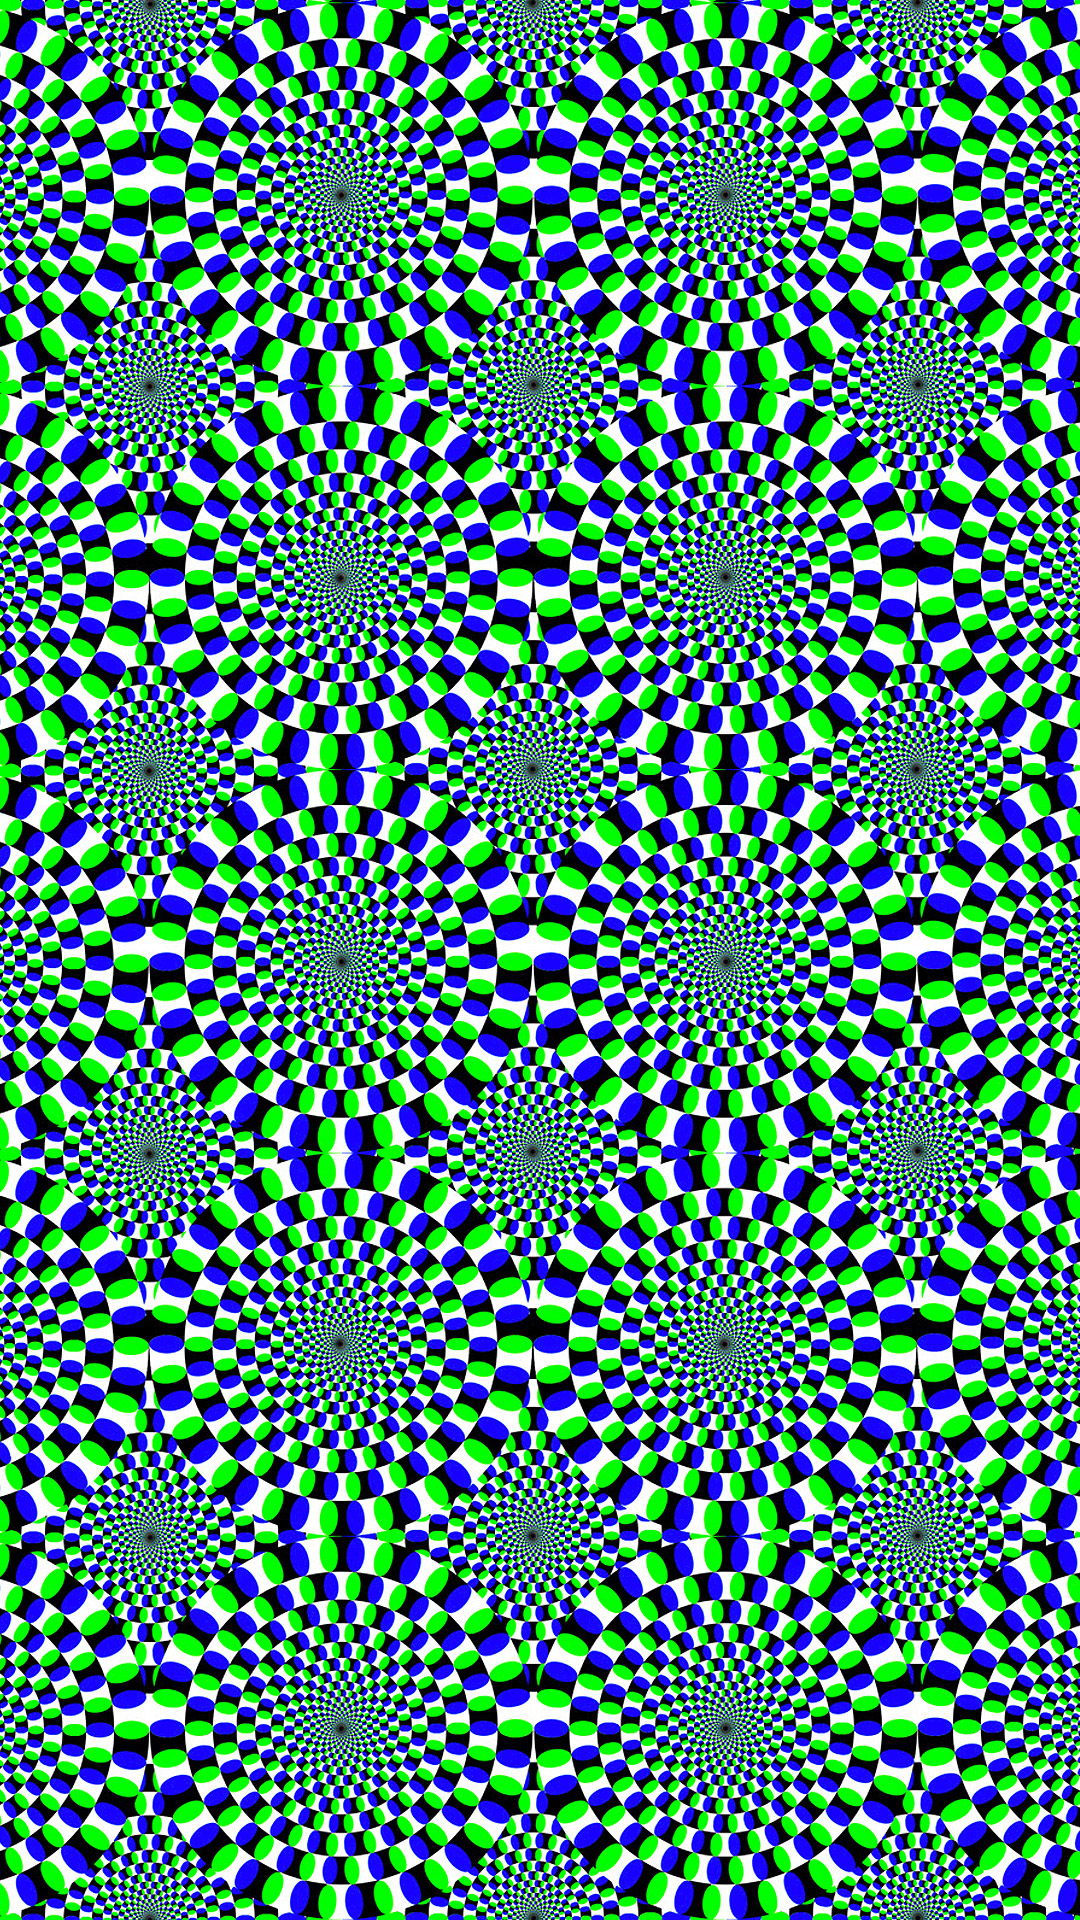 Trippy Optical Illusions That Appear to be Animated Use as Phone